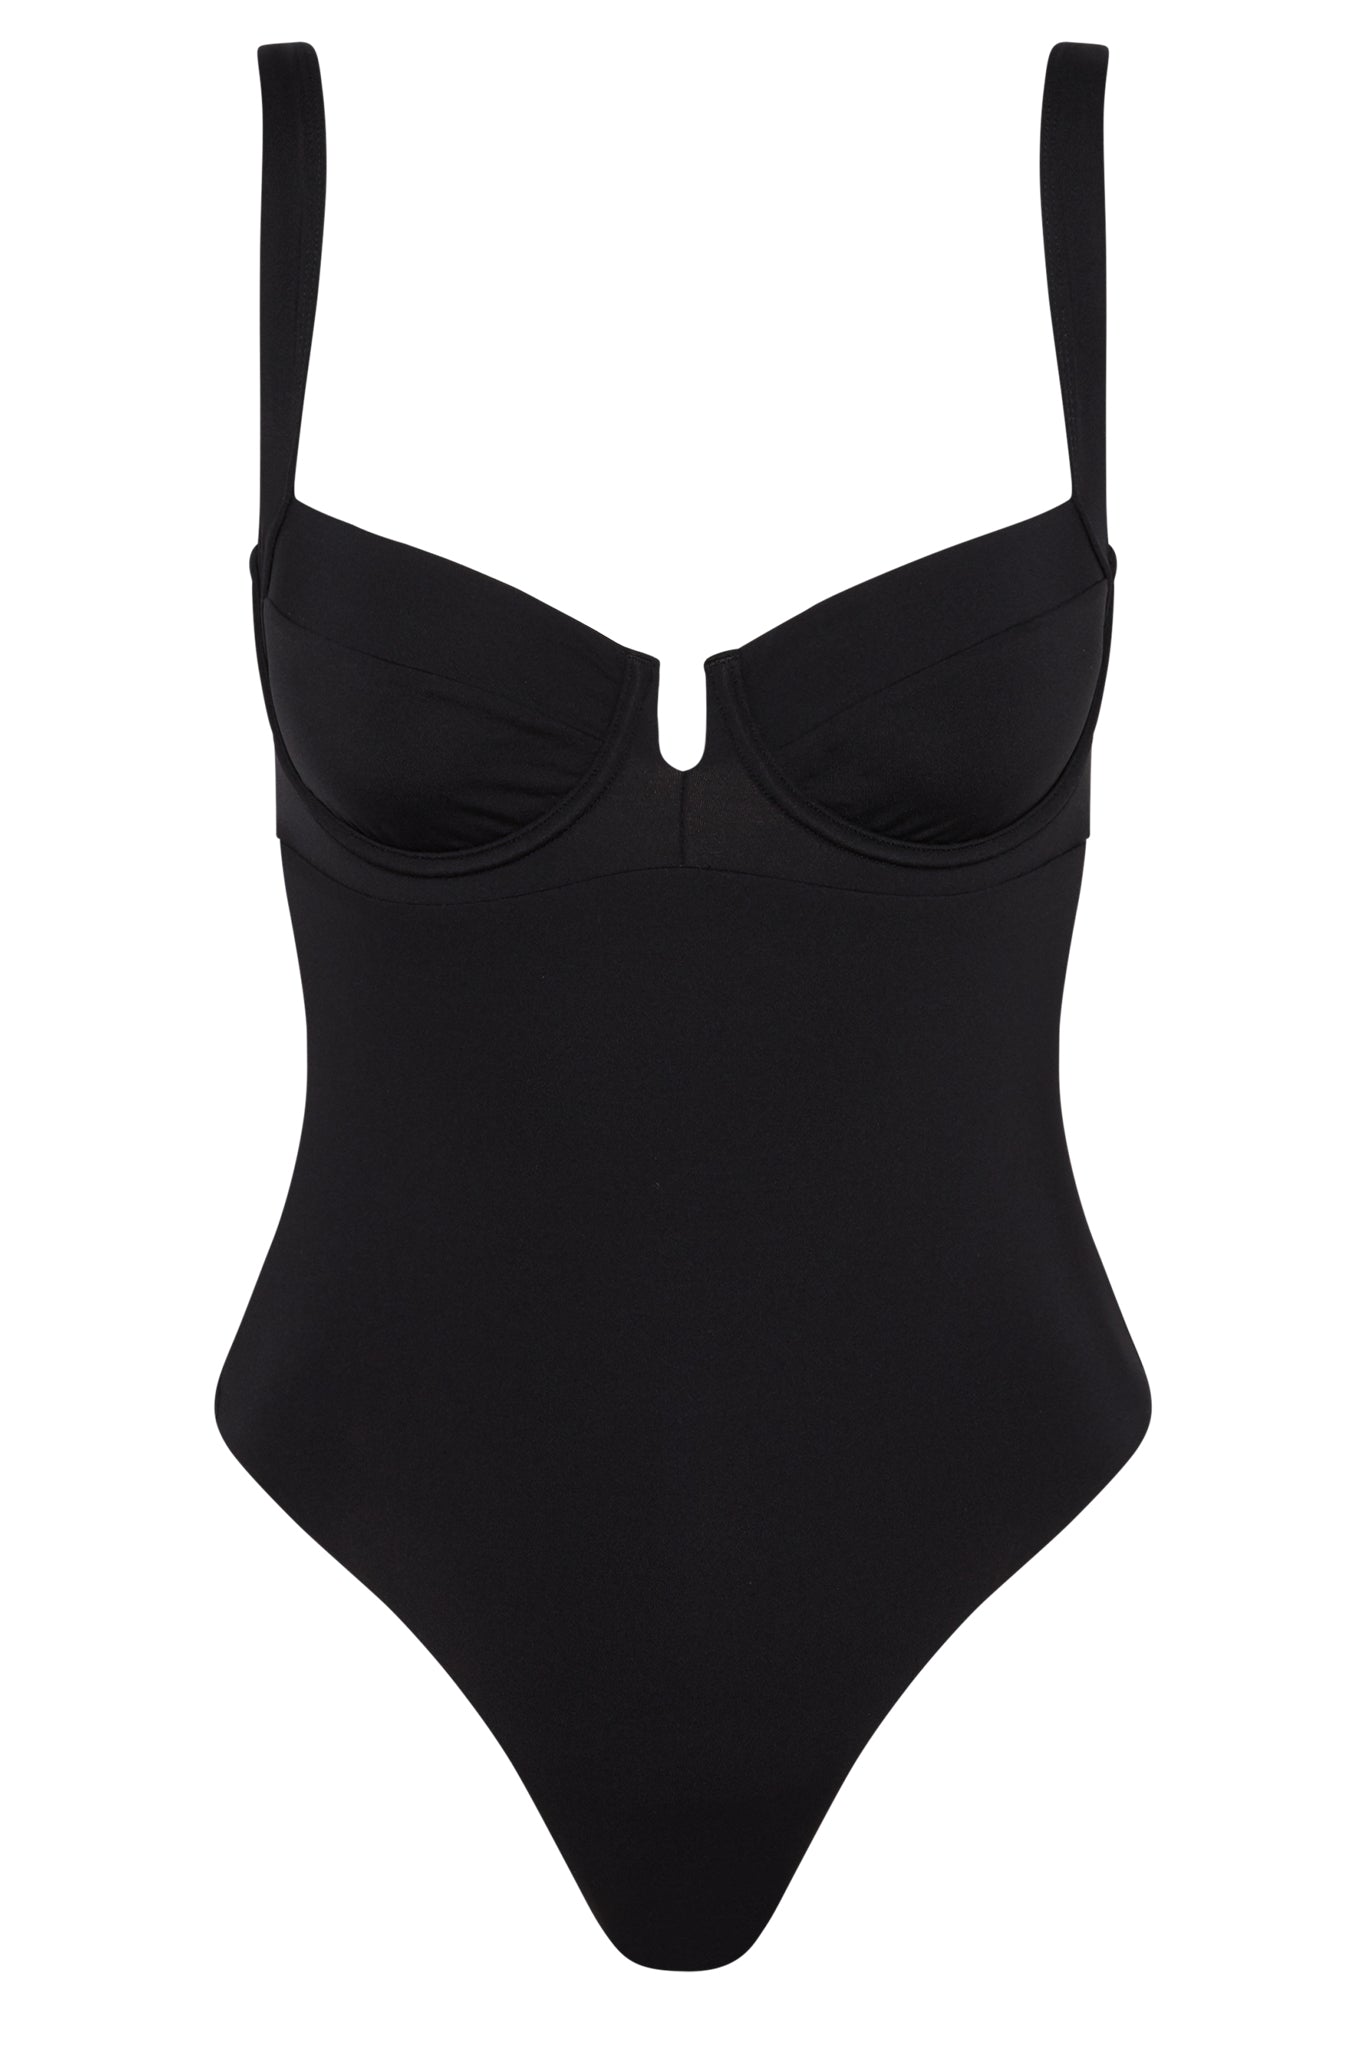 The Best Swimsuits for Your Body Type Created by Black Swimwear Designers -  SIGNATURE BRIDE